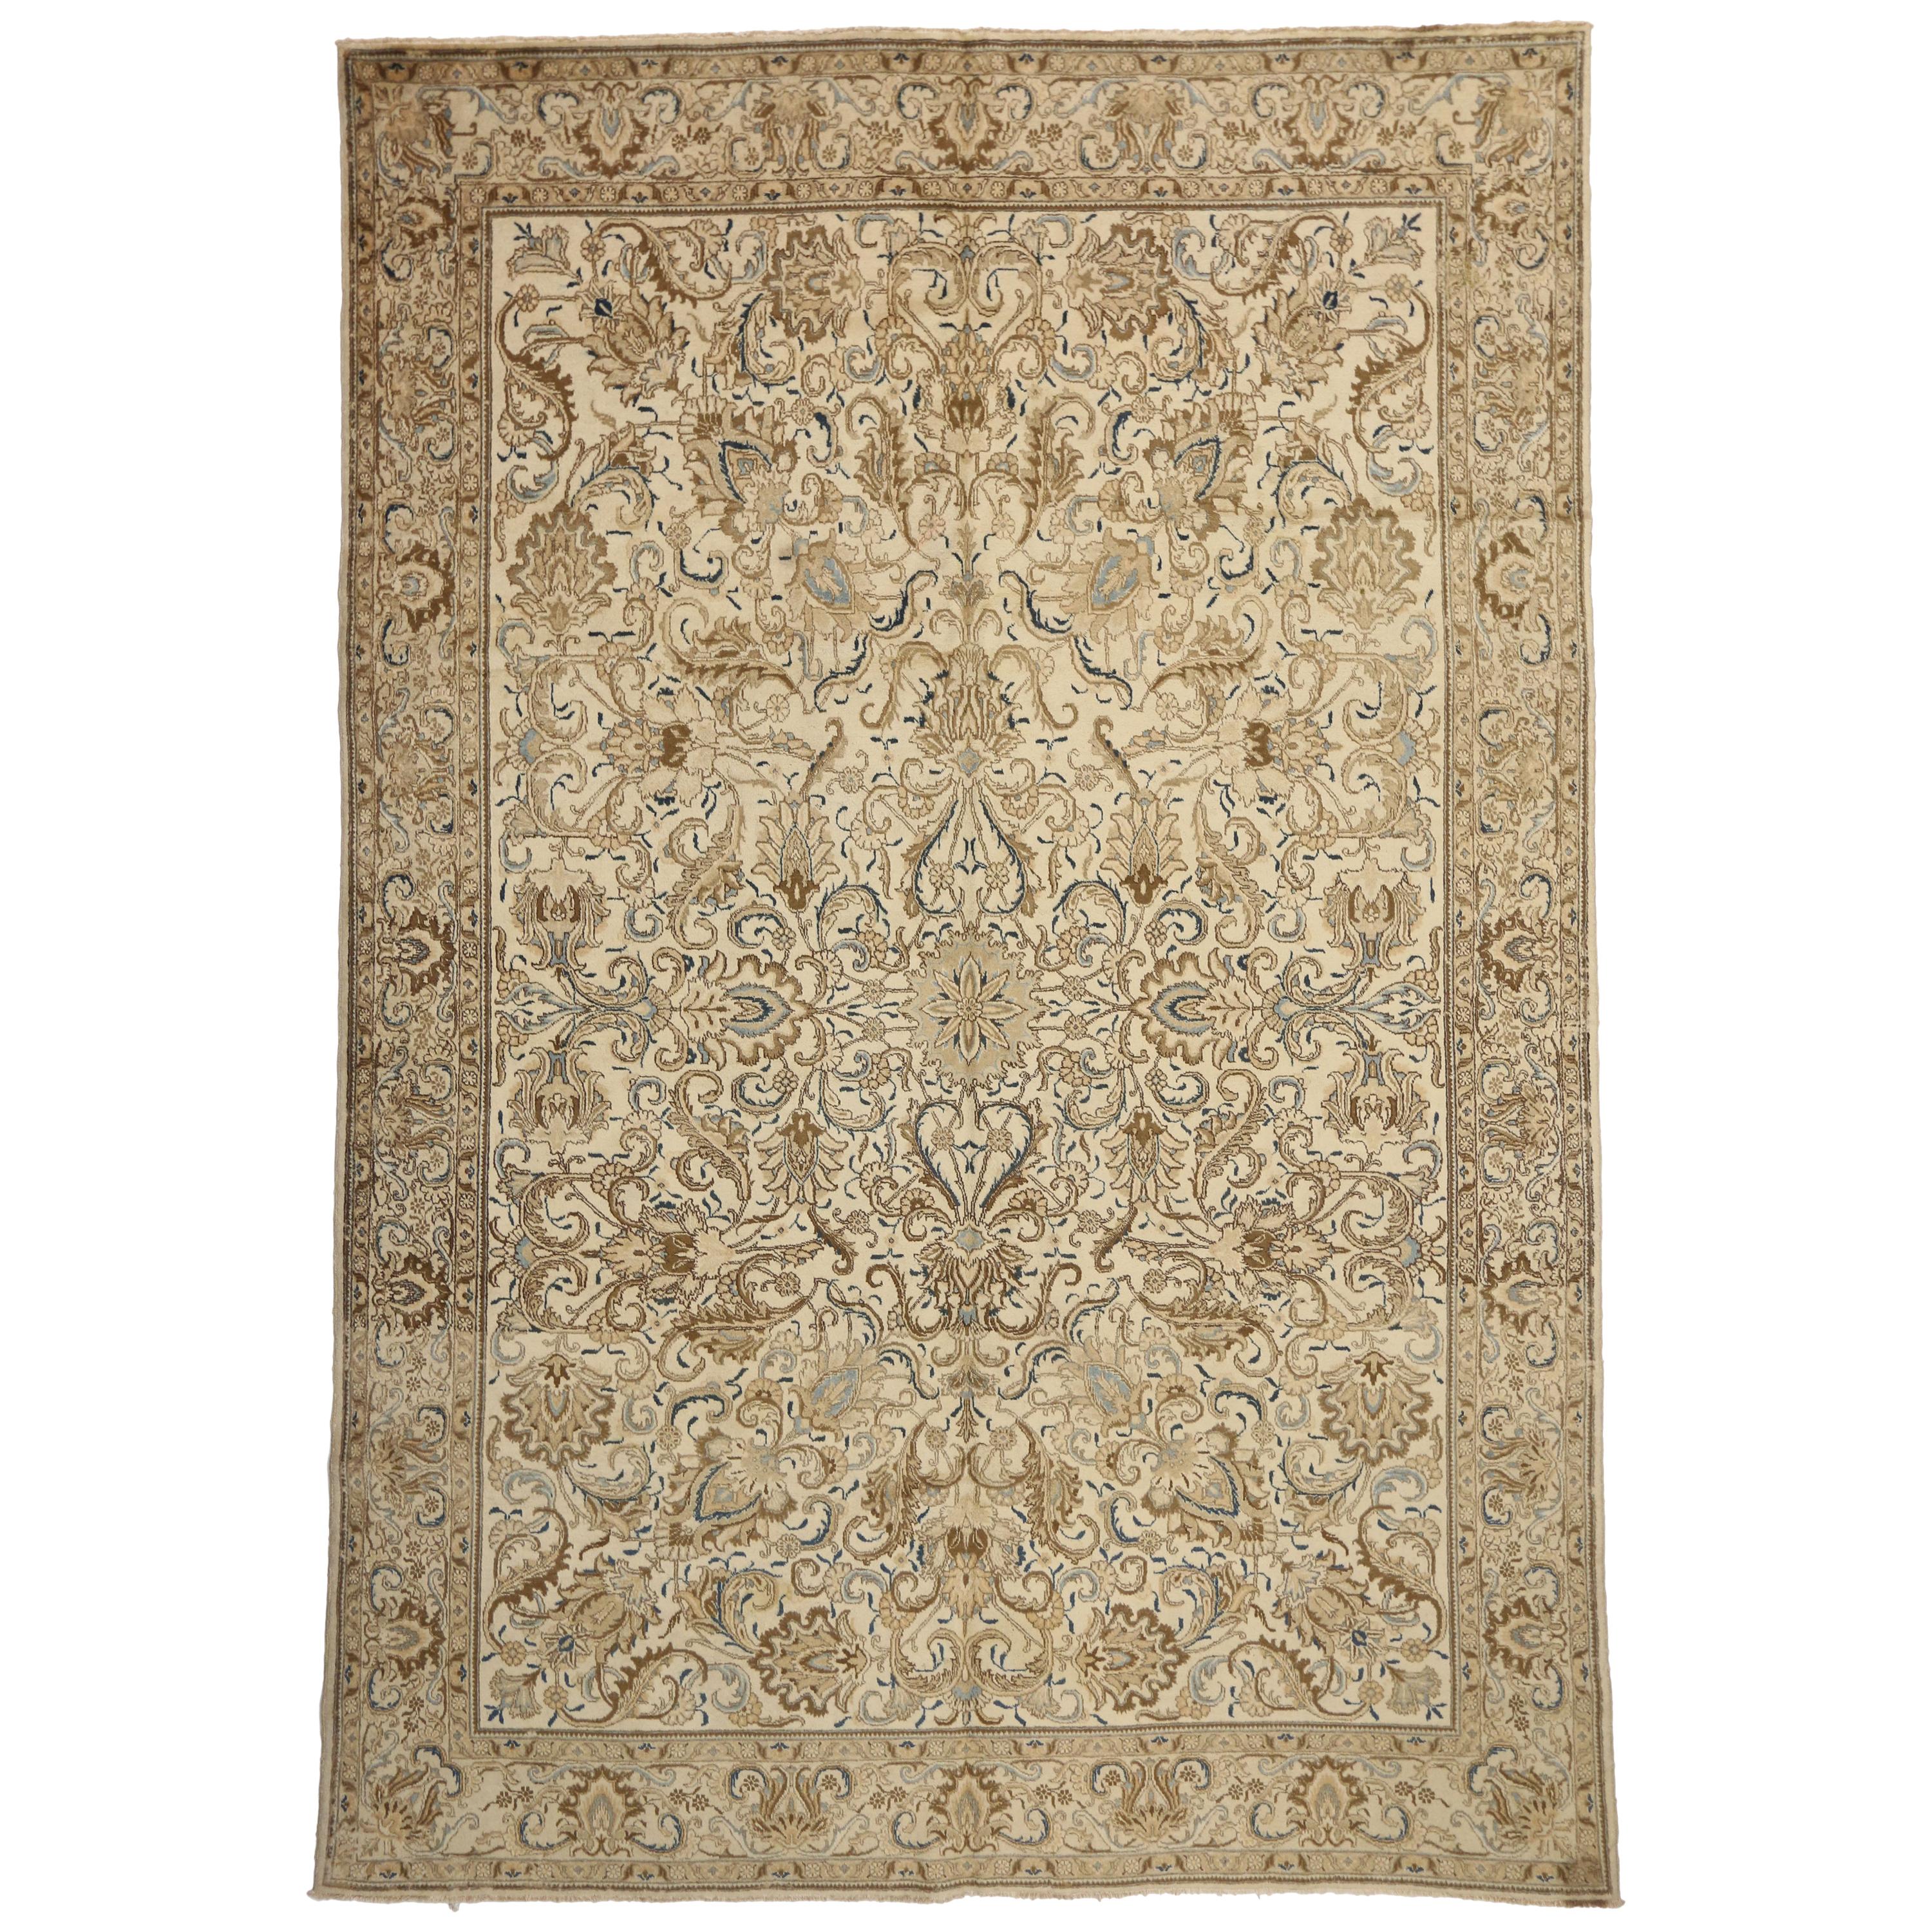 Vintage Persian Tabriz Rug with Victorian Style and Light Colors